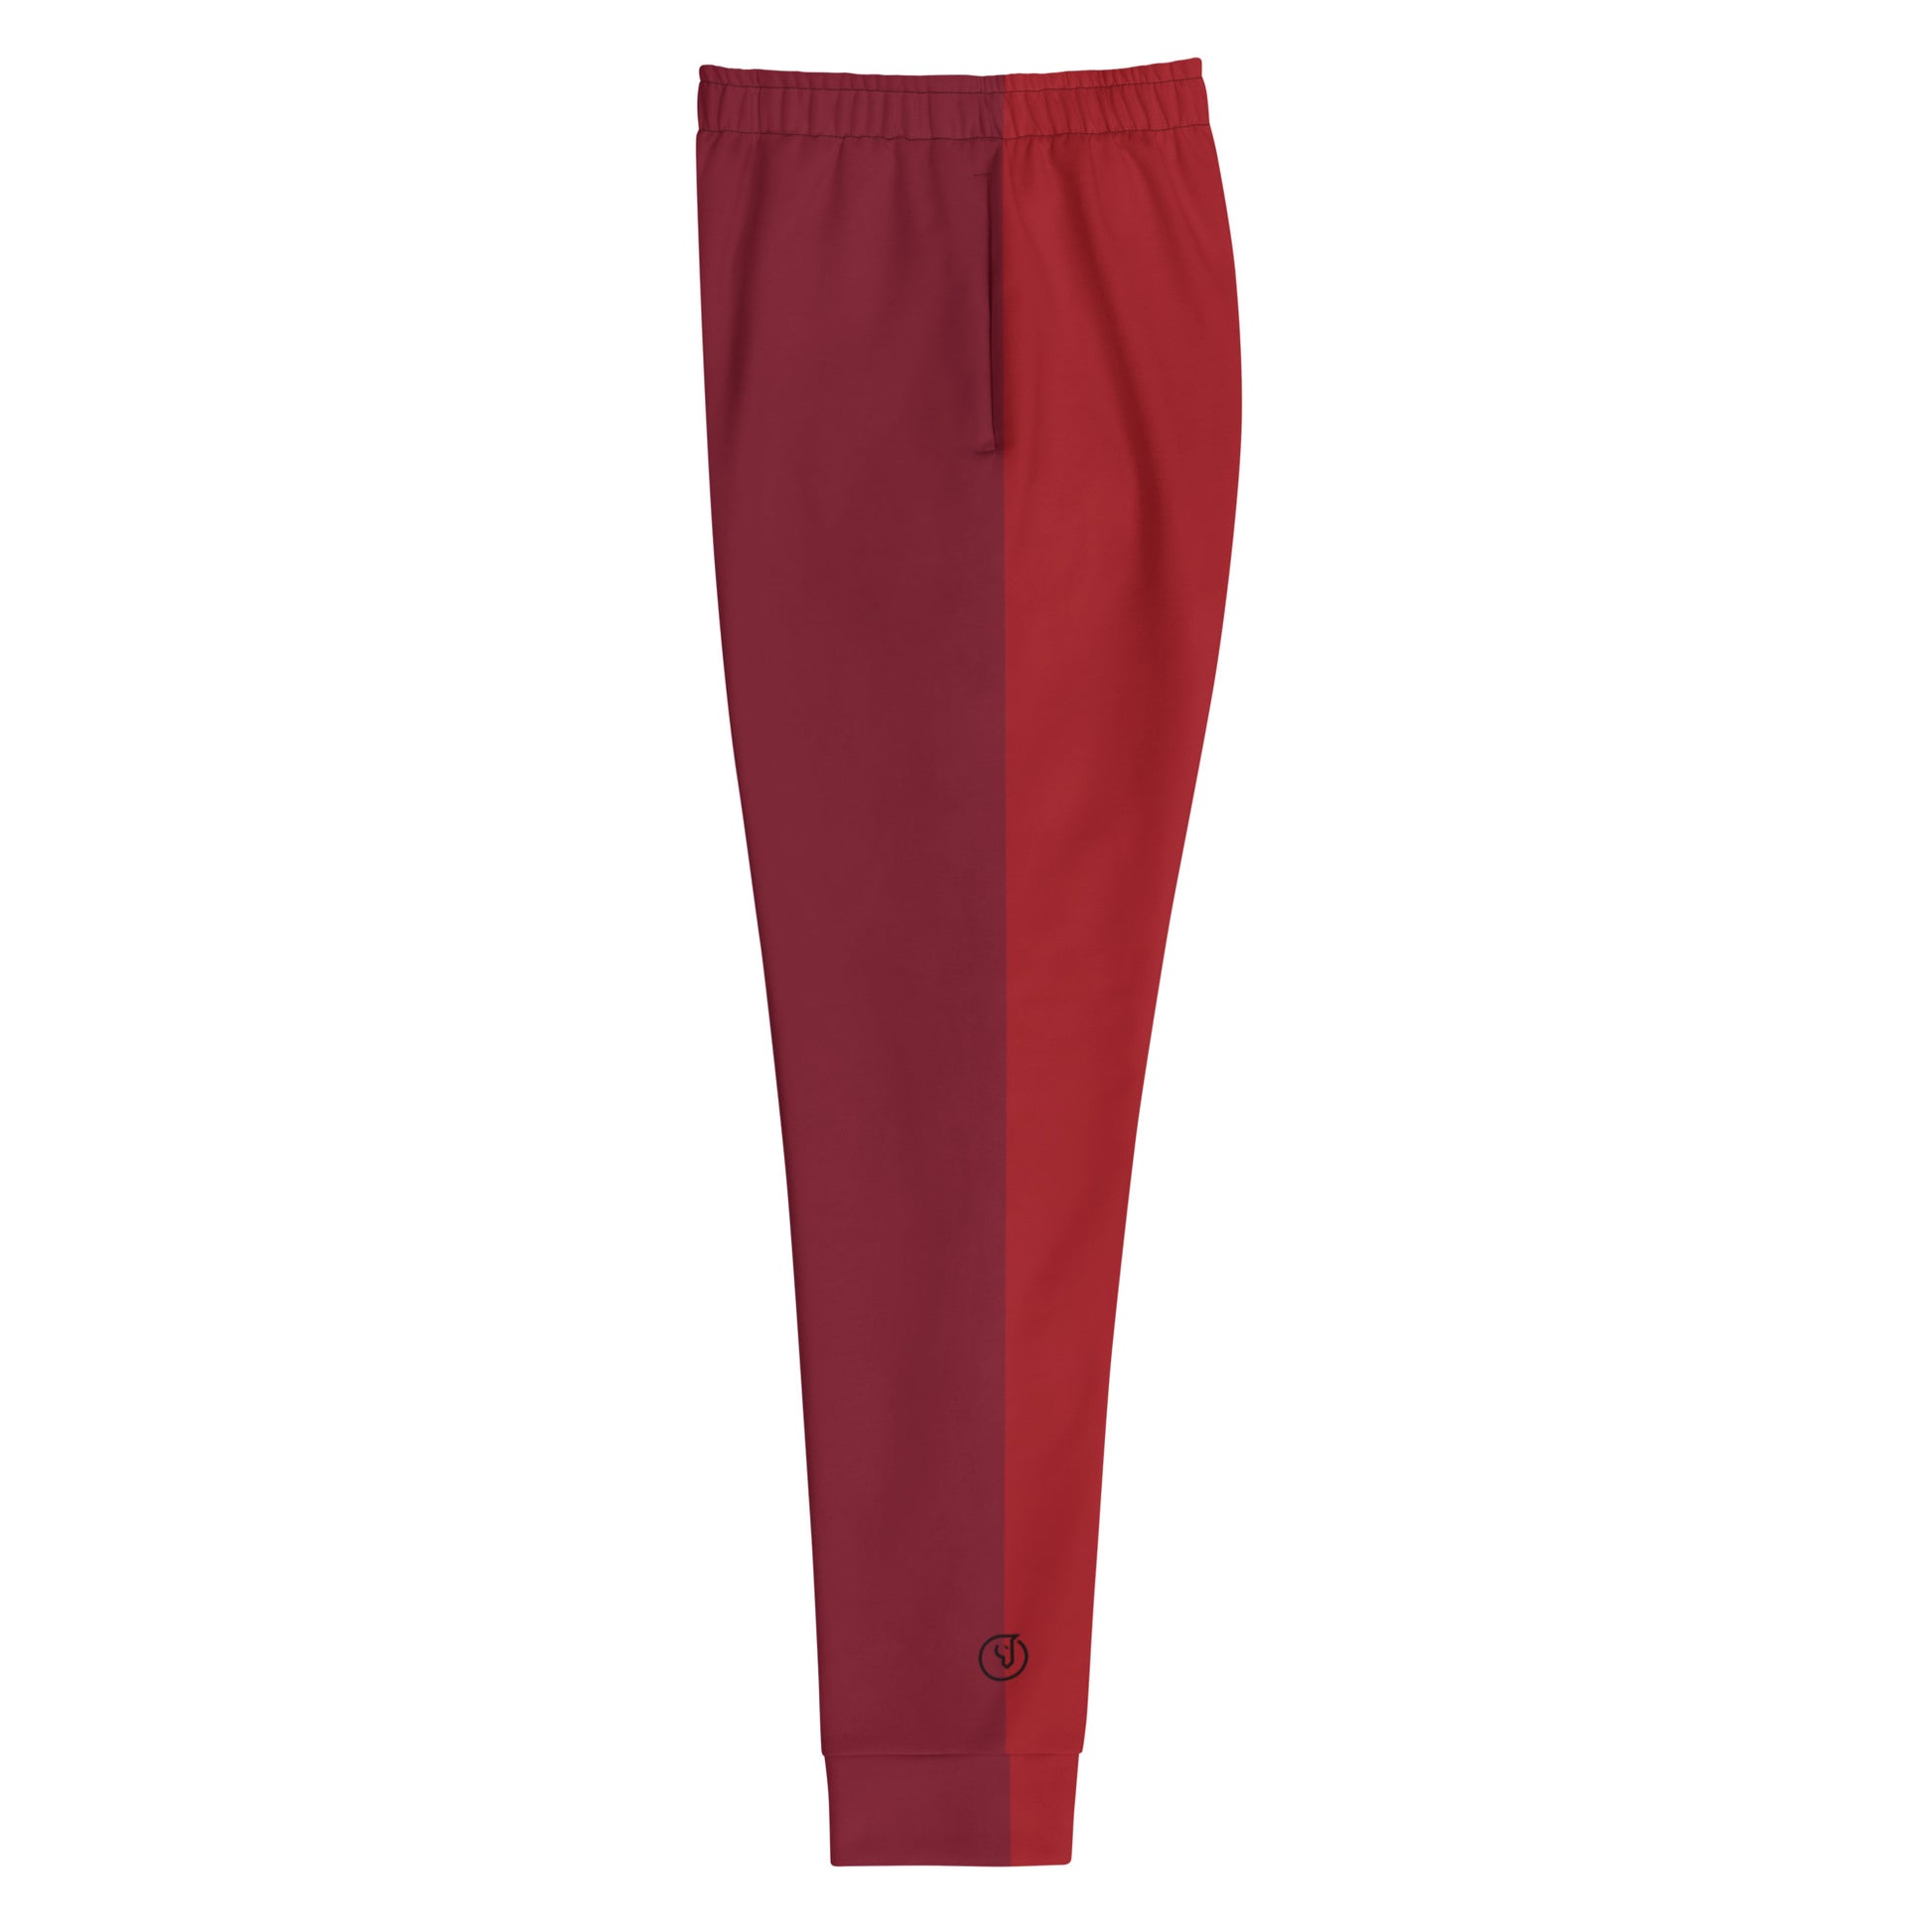 Humble Sportswear™, women's slim fit red color block all-over print fleece joggers